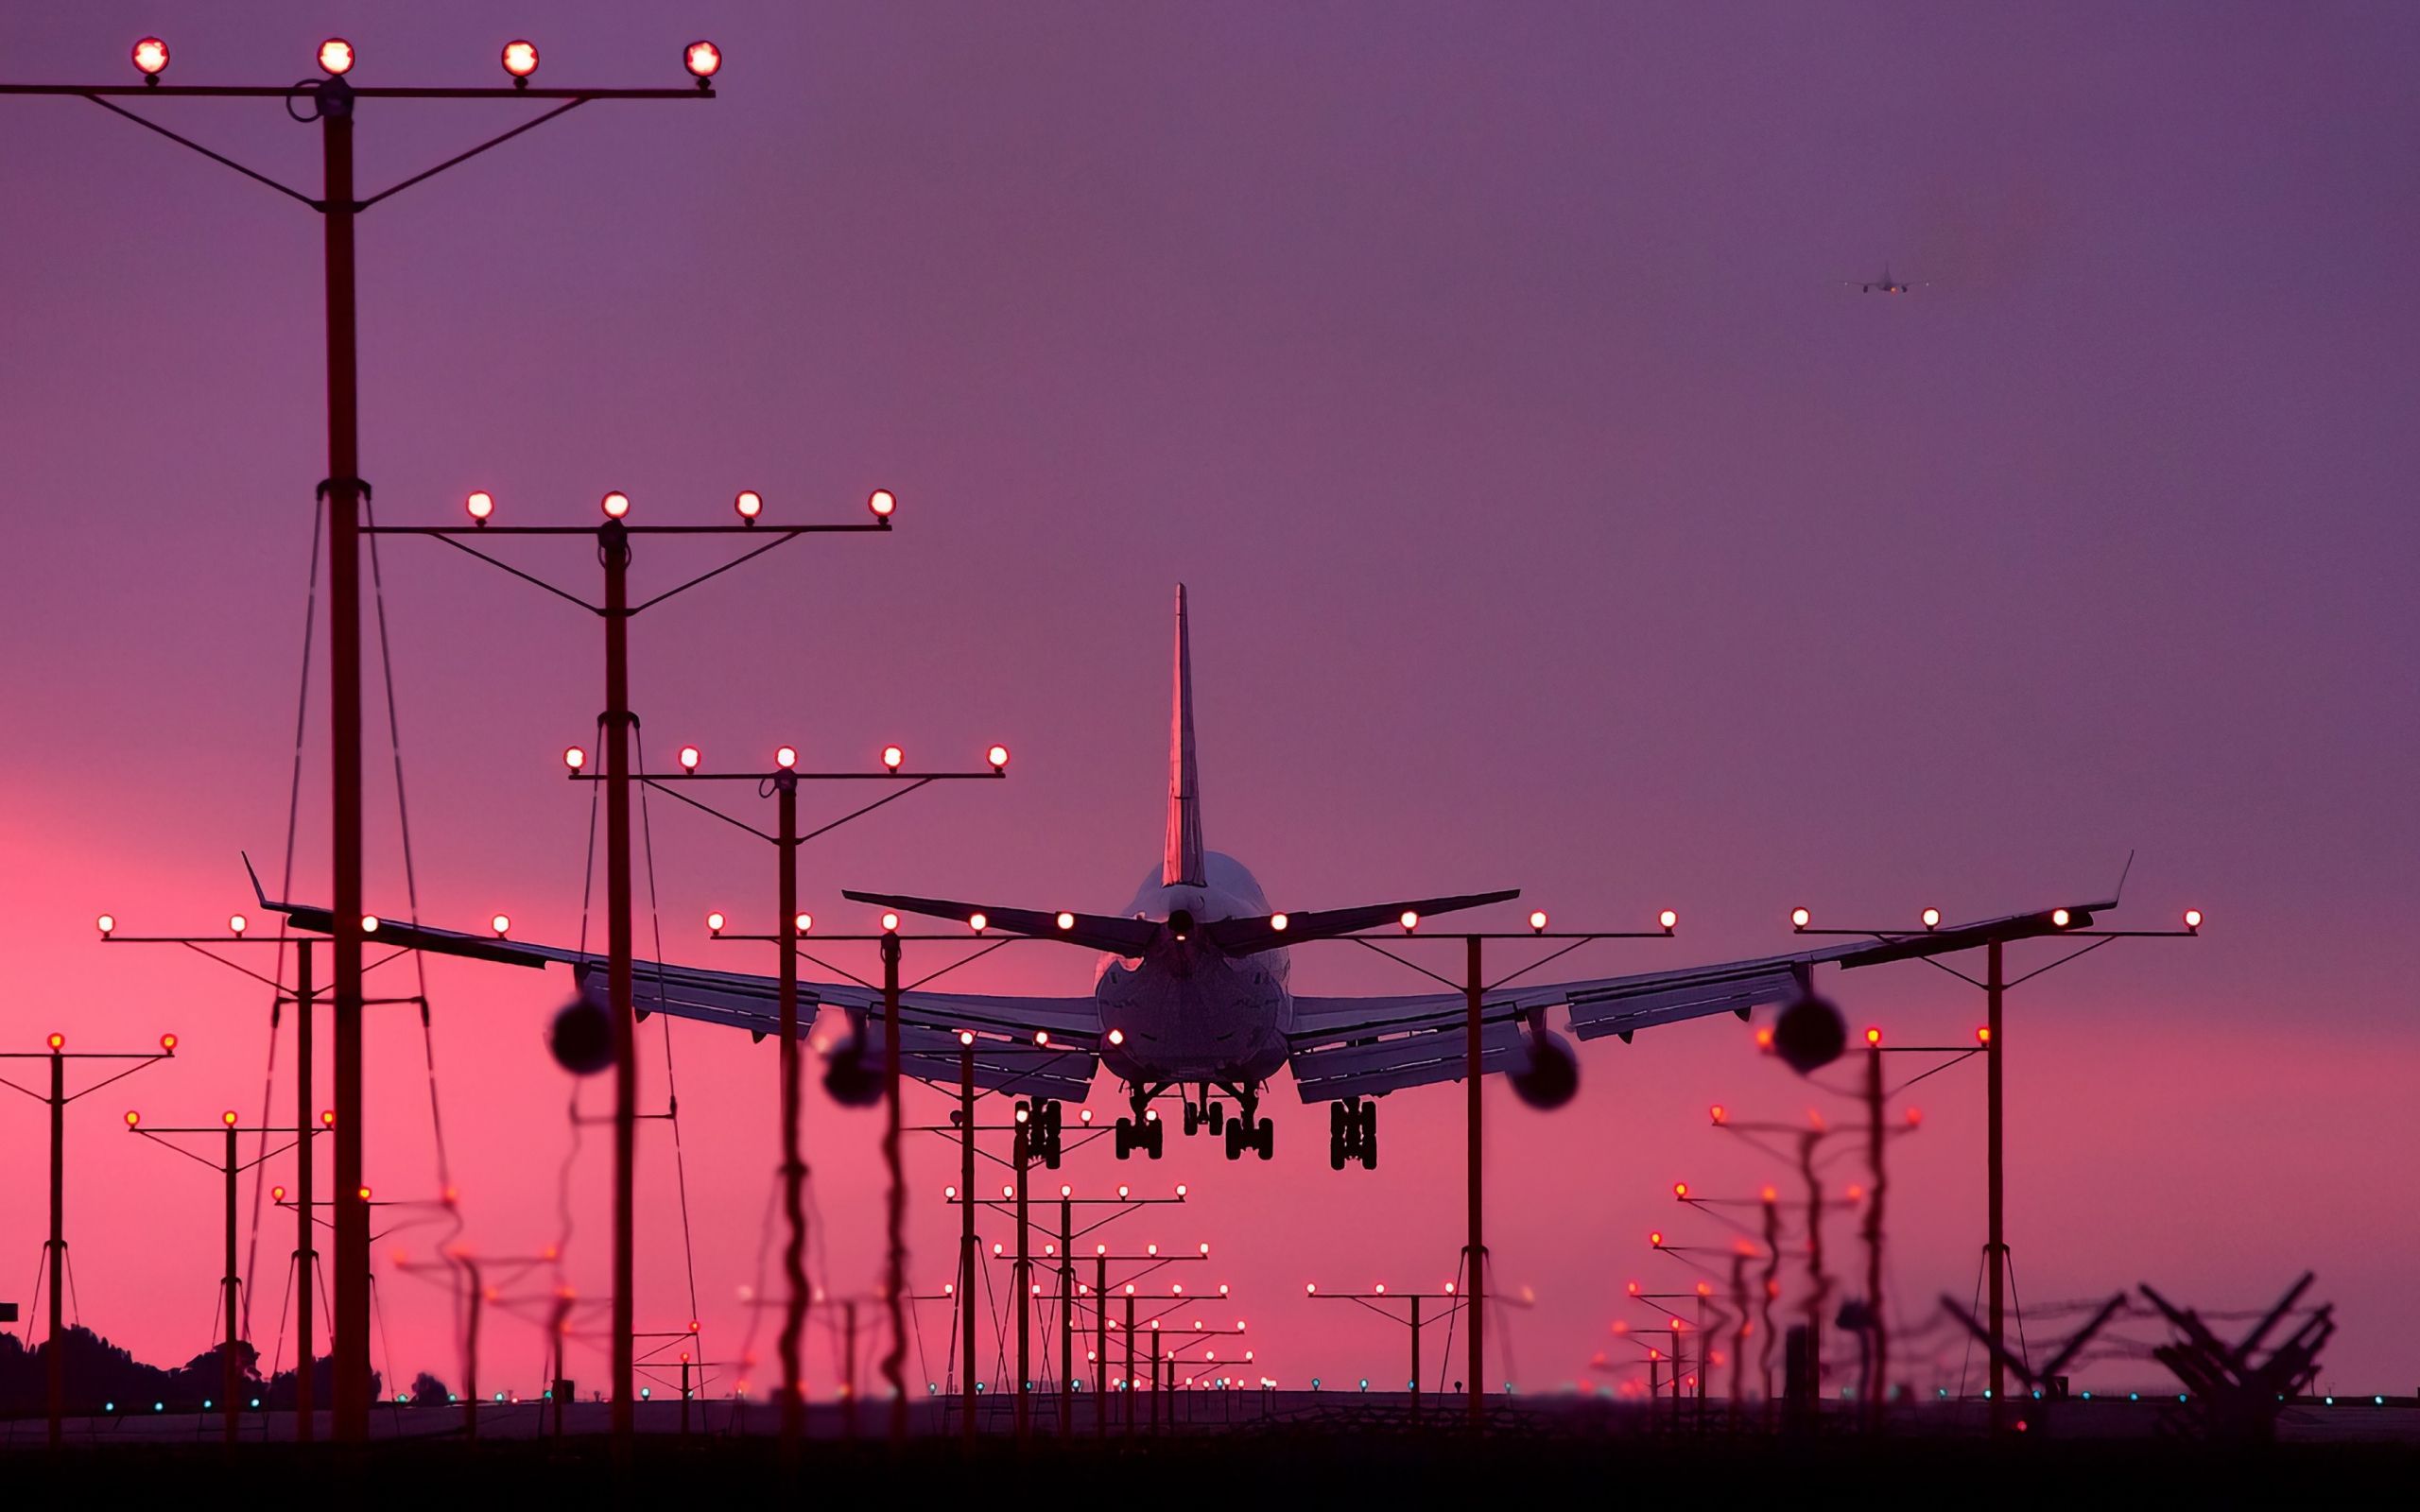 A plane flying low over a runway with lights. - 2560x1600, airplane